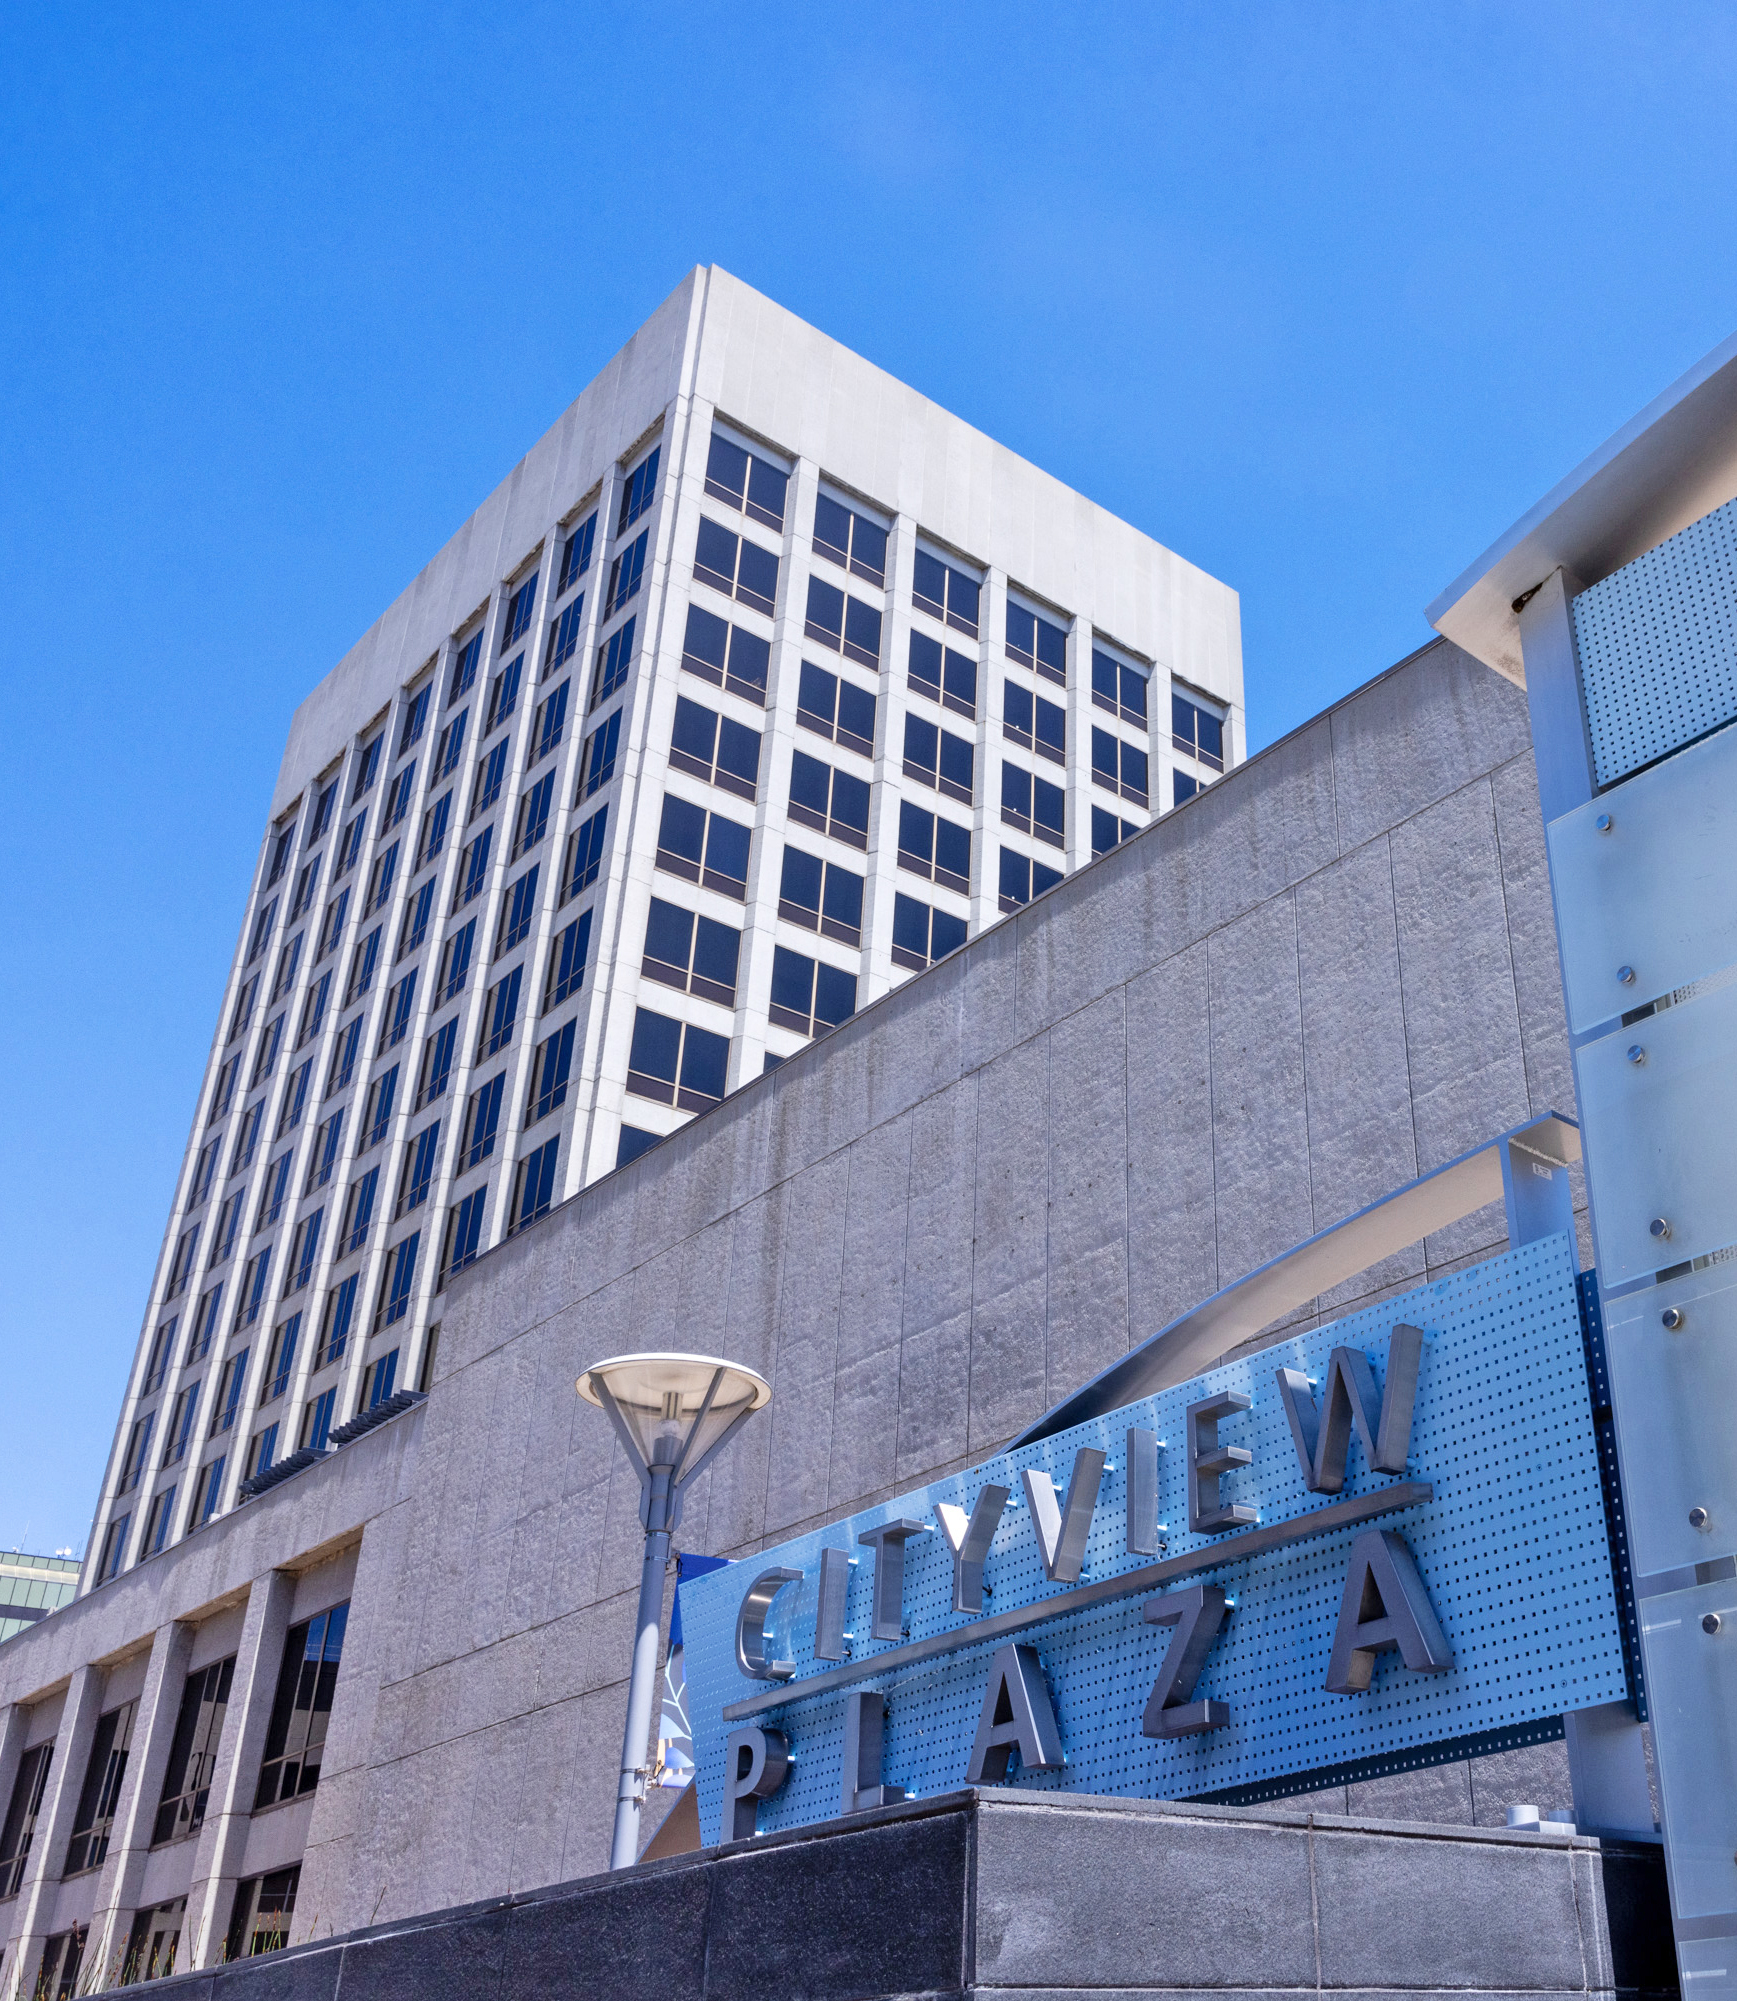 The image shows a tall, modern office building with multiple windows. In the foreground, there's a sign that reads &quot;Cityview Plaza&quot; against a clear blue sky.